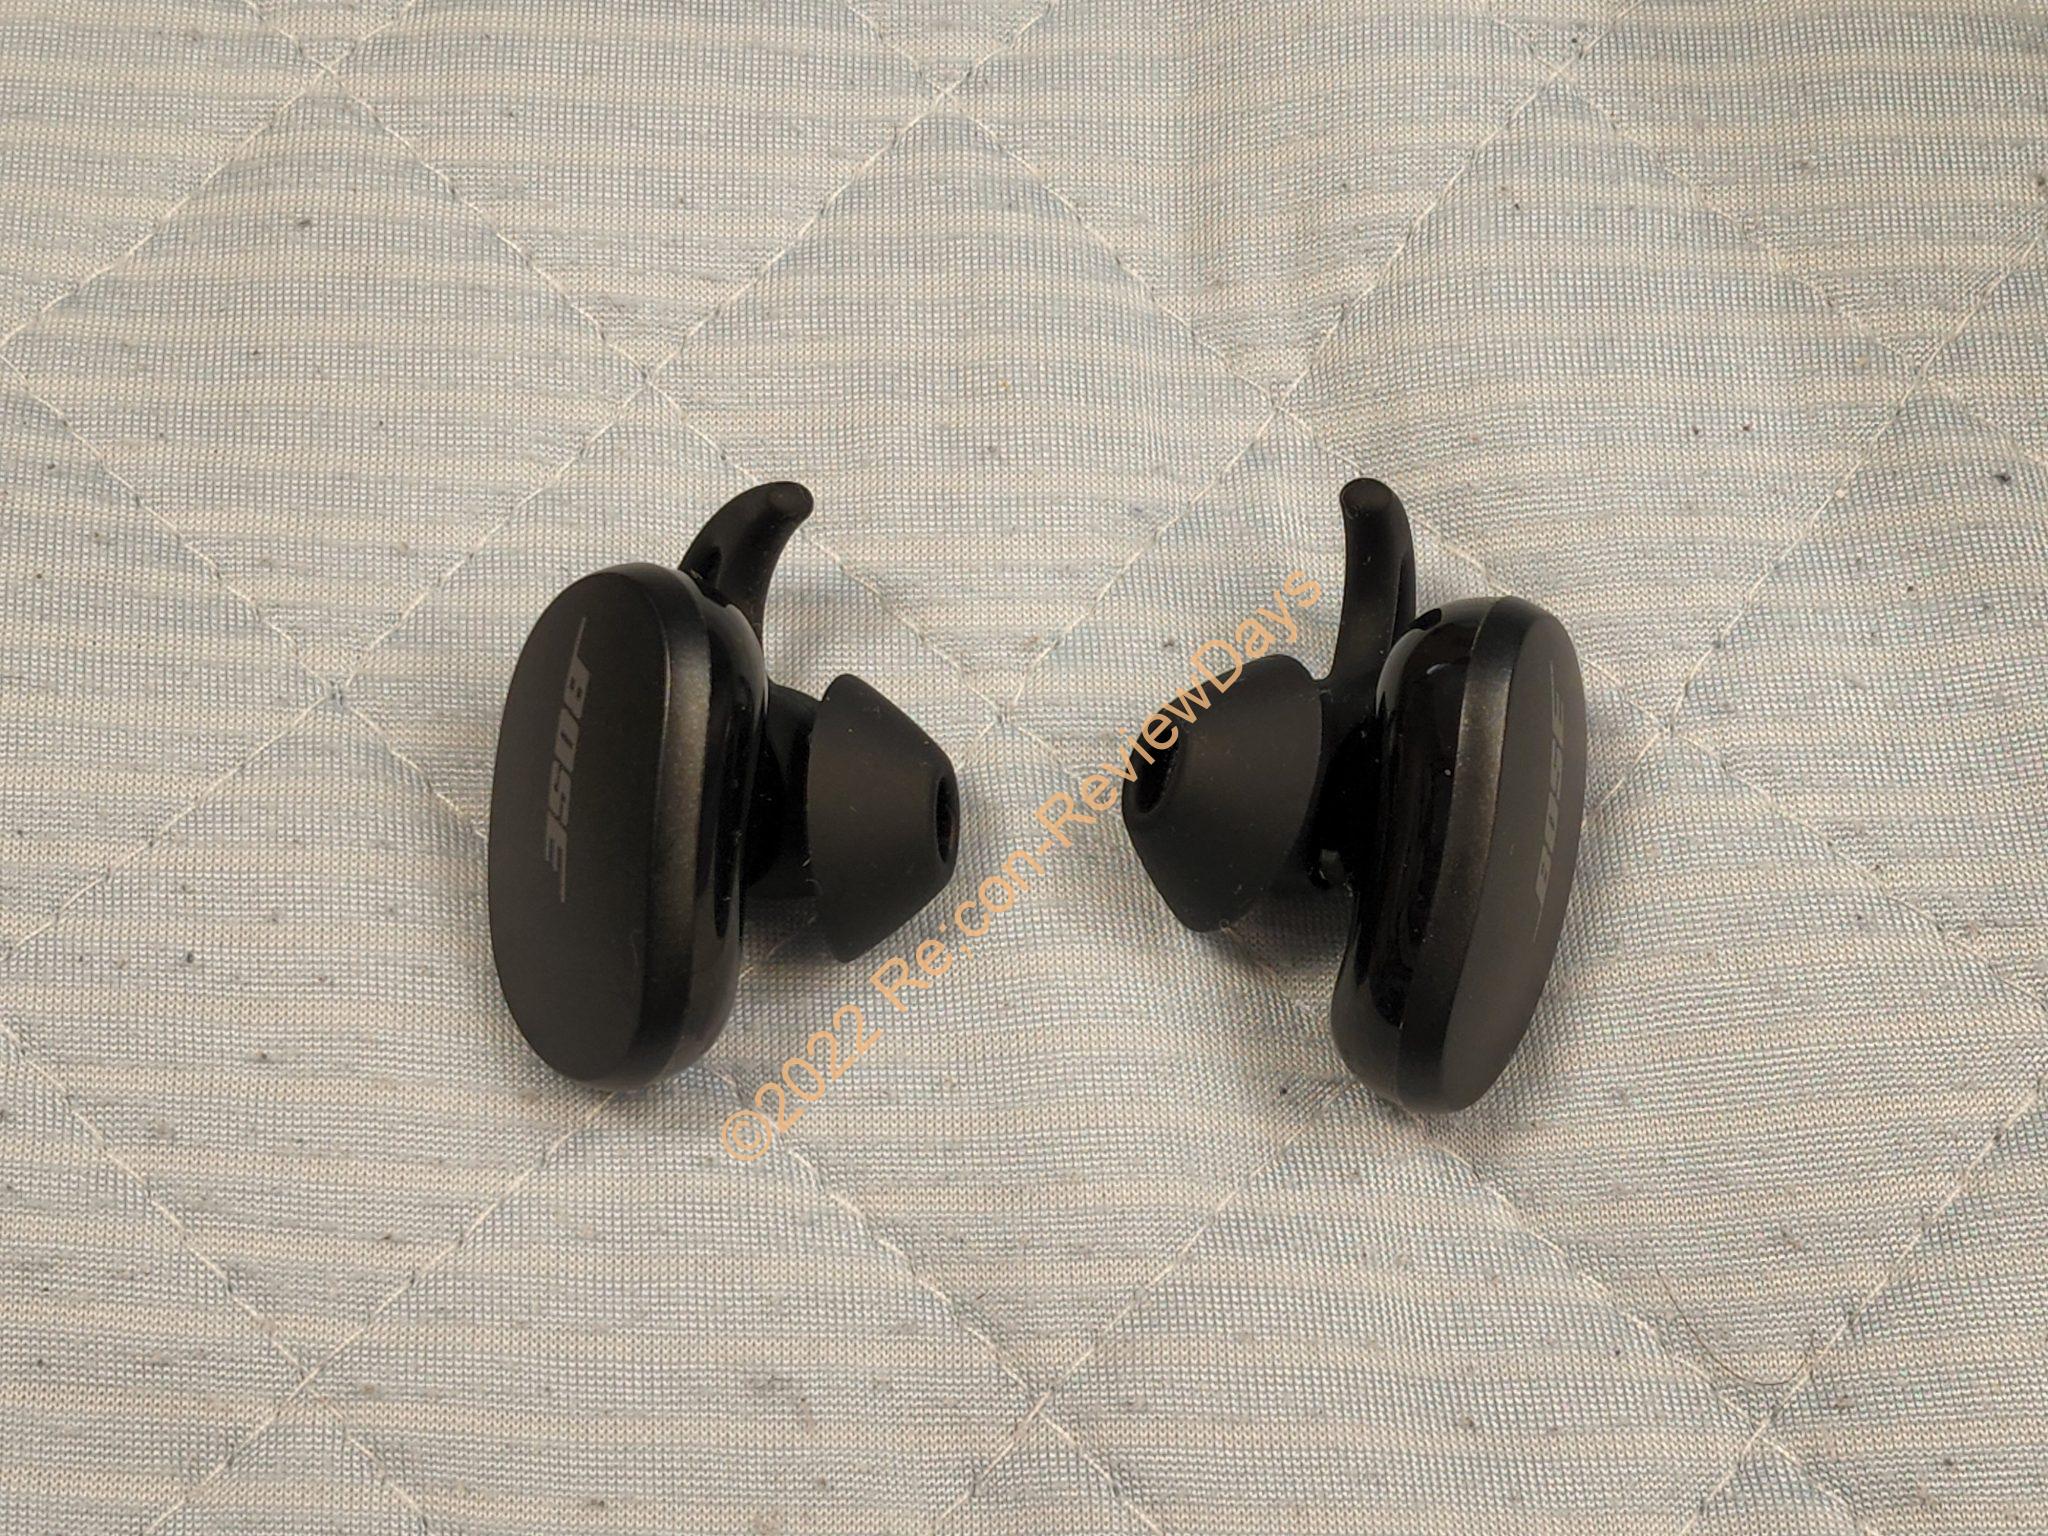 BOSE QuietComfort Earbudsの充電ケースを失くしてしまいました #BOSE #完全ワイヤレス #イヤホン #QuietComfortEarbuds